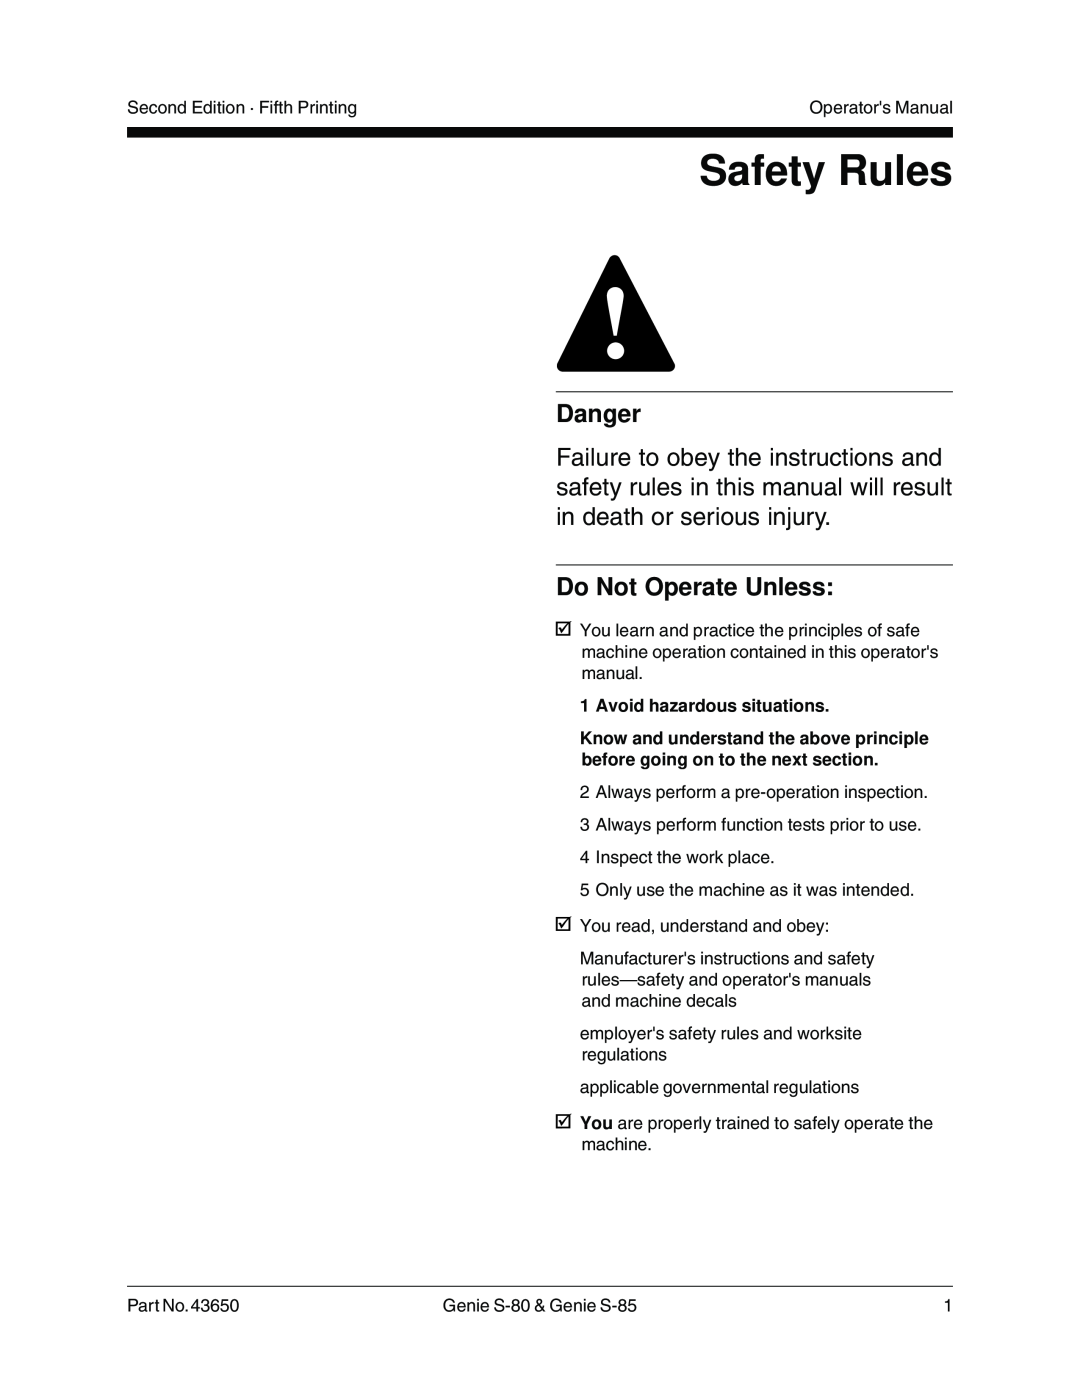 Genie S-80, S-85, 43650 manual Safety Rules, Danger, Do Not Operate Unless, Avoid hazardous situations 